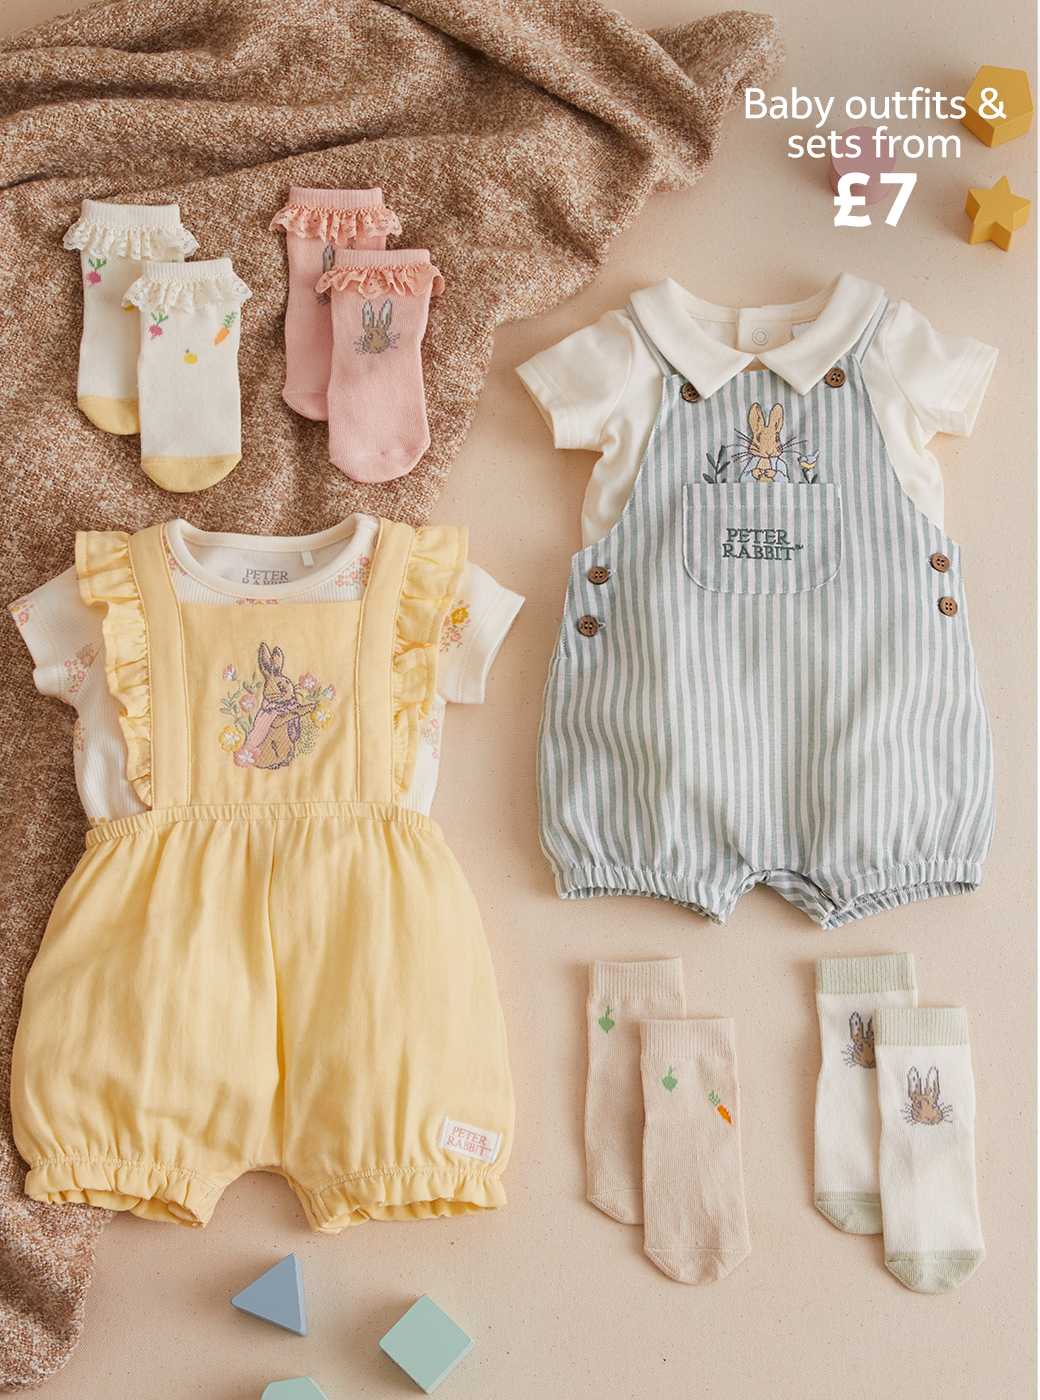 For your new arrival. Shop baby outfits & sets.